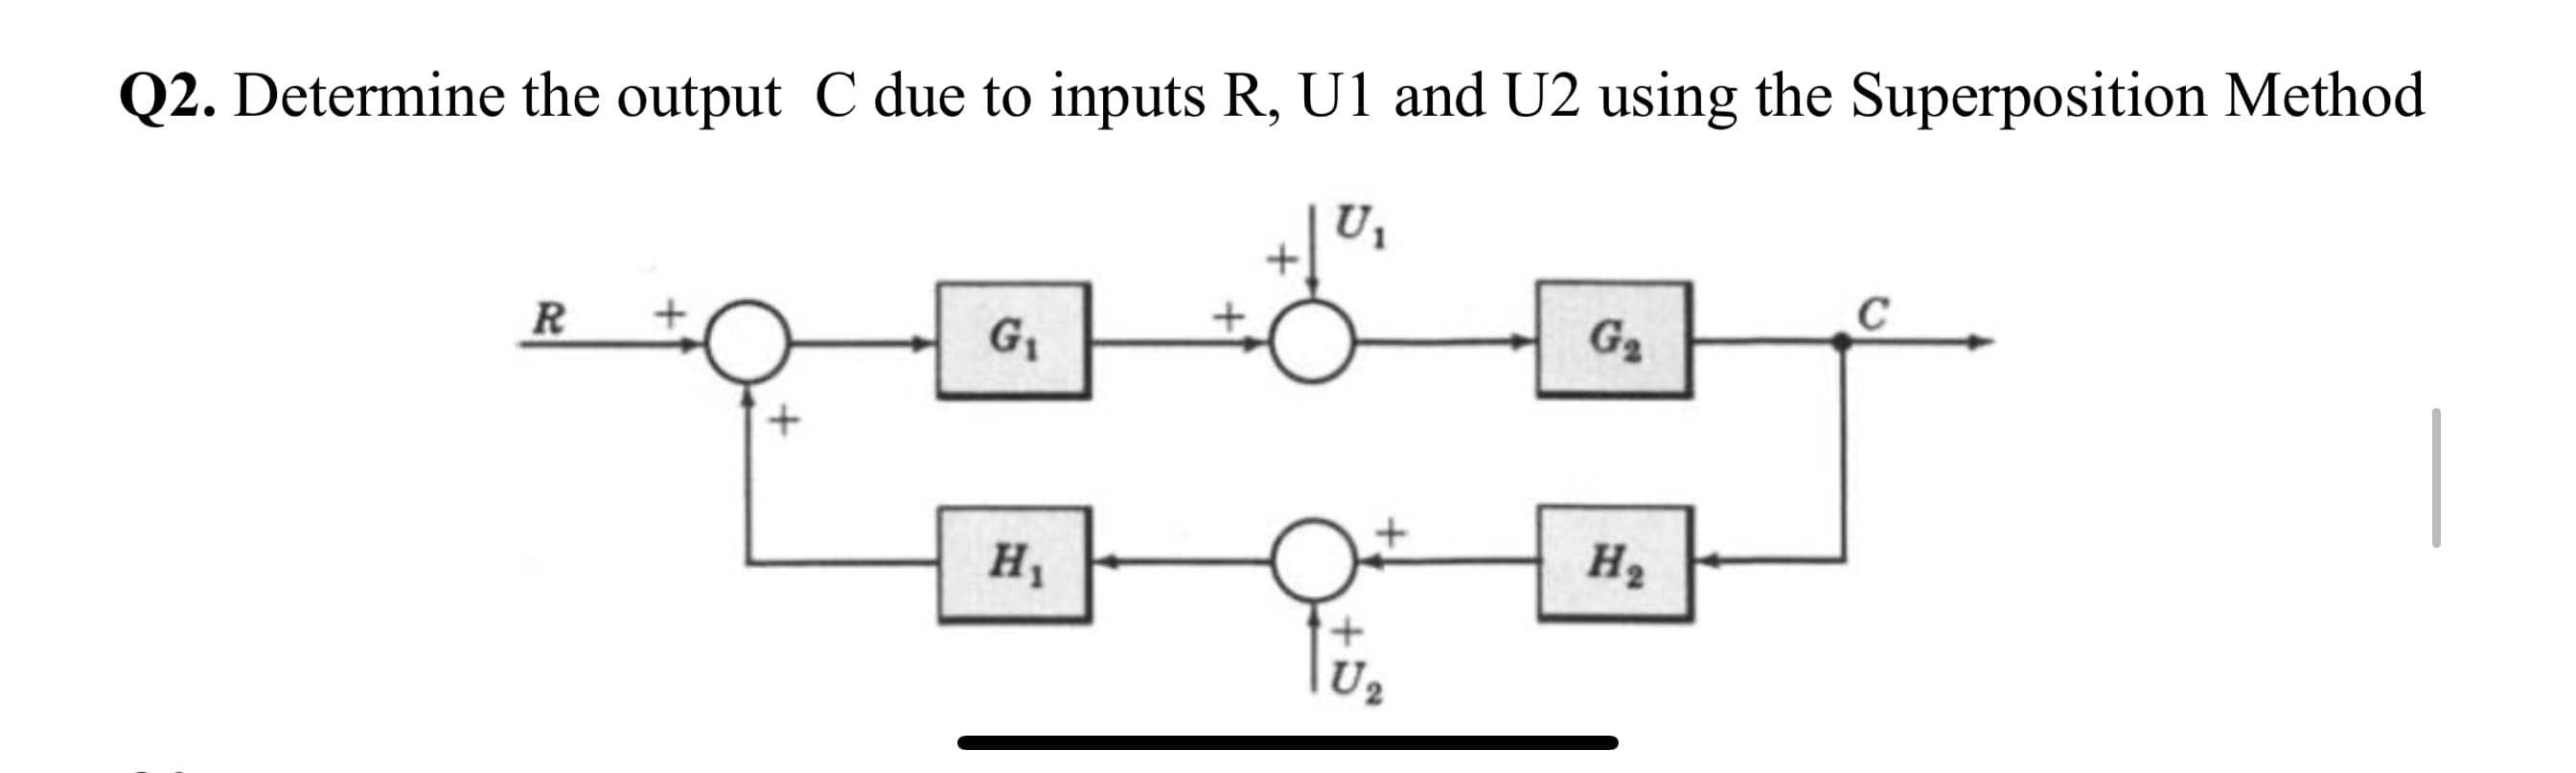 Q2. Determine the output C due to inputs R, U1 and U2 using the Superposition Metho
U,
R
C
G1
G2
H1
H2
